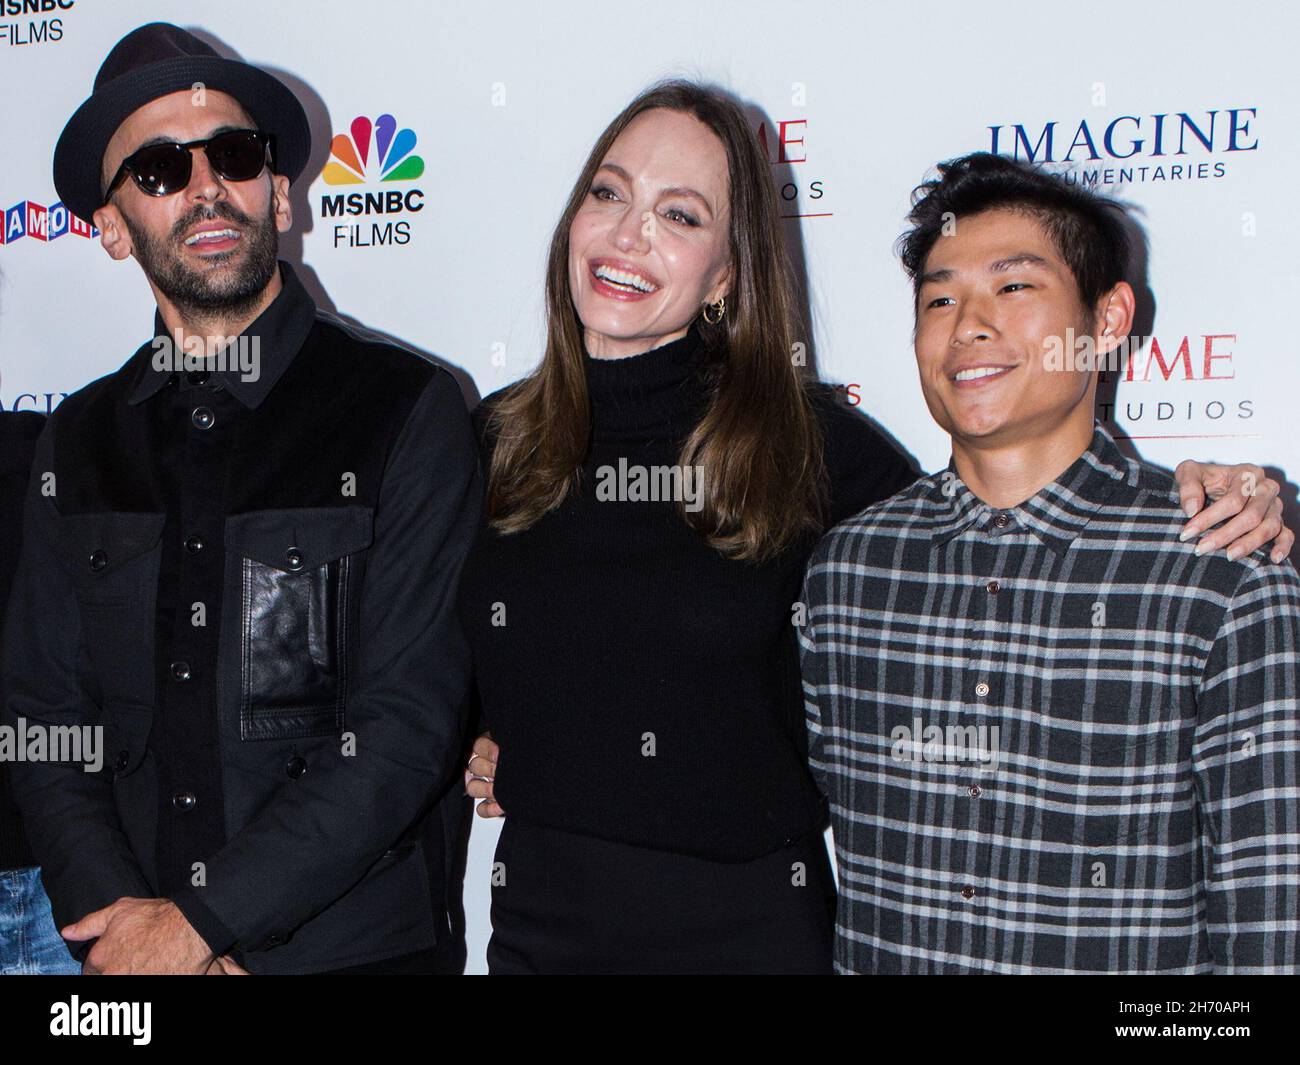 Los Angeles, United States. 18th Nov, 2021. LOS ANGELES, CALIFORNIA, USA - NOVEMBER 18: Street artist JR, actress Angelina Jolie and Pax Thien Jolie-Pitt arrive at the Los Angeles Premiere Of MSNBC Films' 'Paper & Glue: A JR Project' held at the Museum Of Tolerance on November 18, 2021 in Los Angeles, California, United States. (Photo by Rudy Torres/Image Press Agency/Sipa USA) Credit: Sipa USA/Alamy Live News Stock Photo